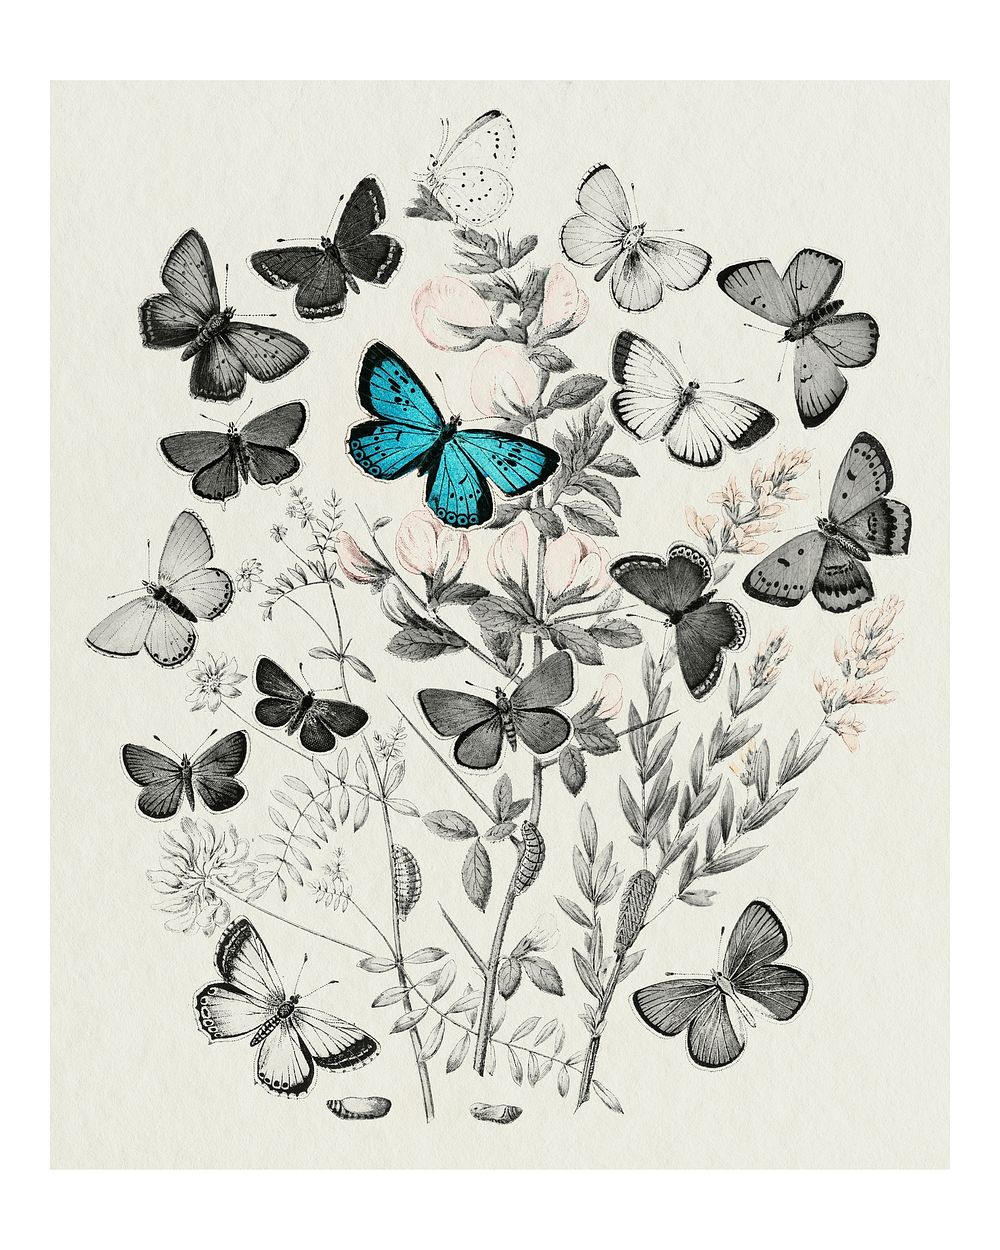 Butterflies and moths fluttering over flowers vintage illustration wall art print and poster design remix from original…